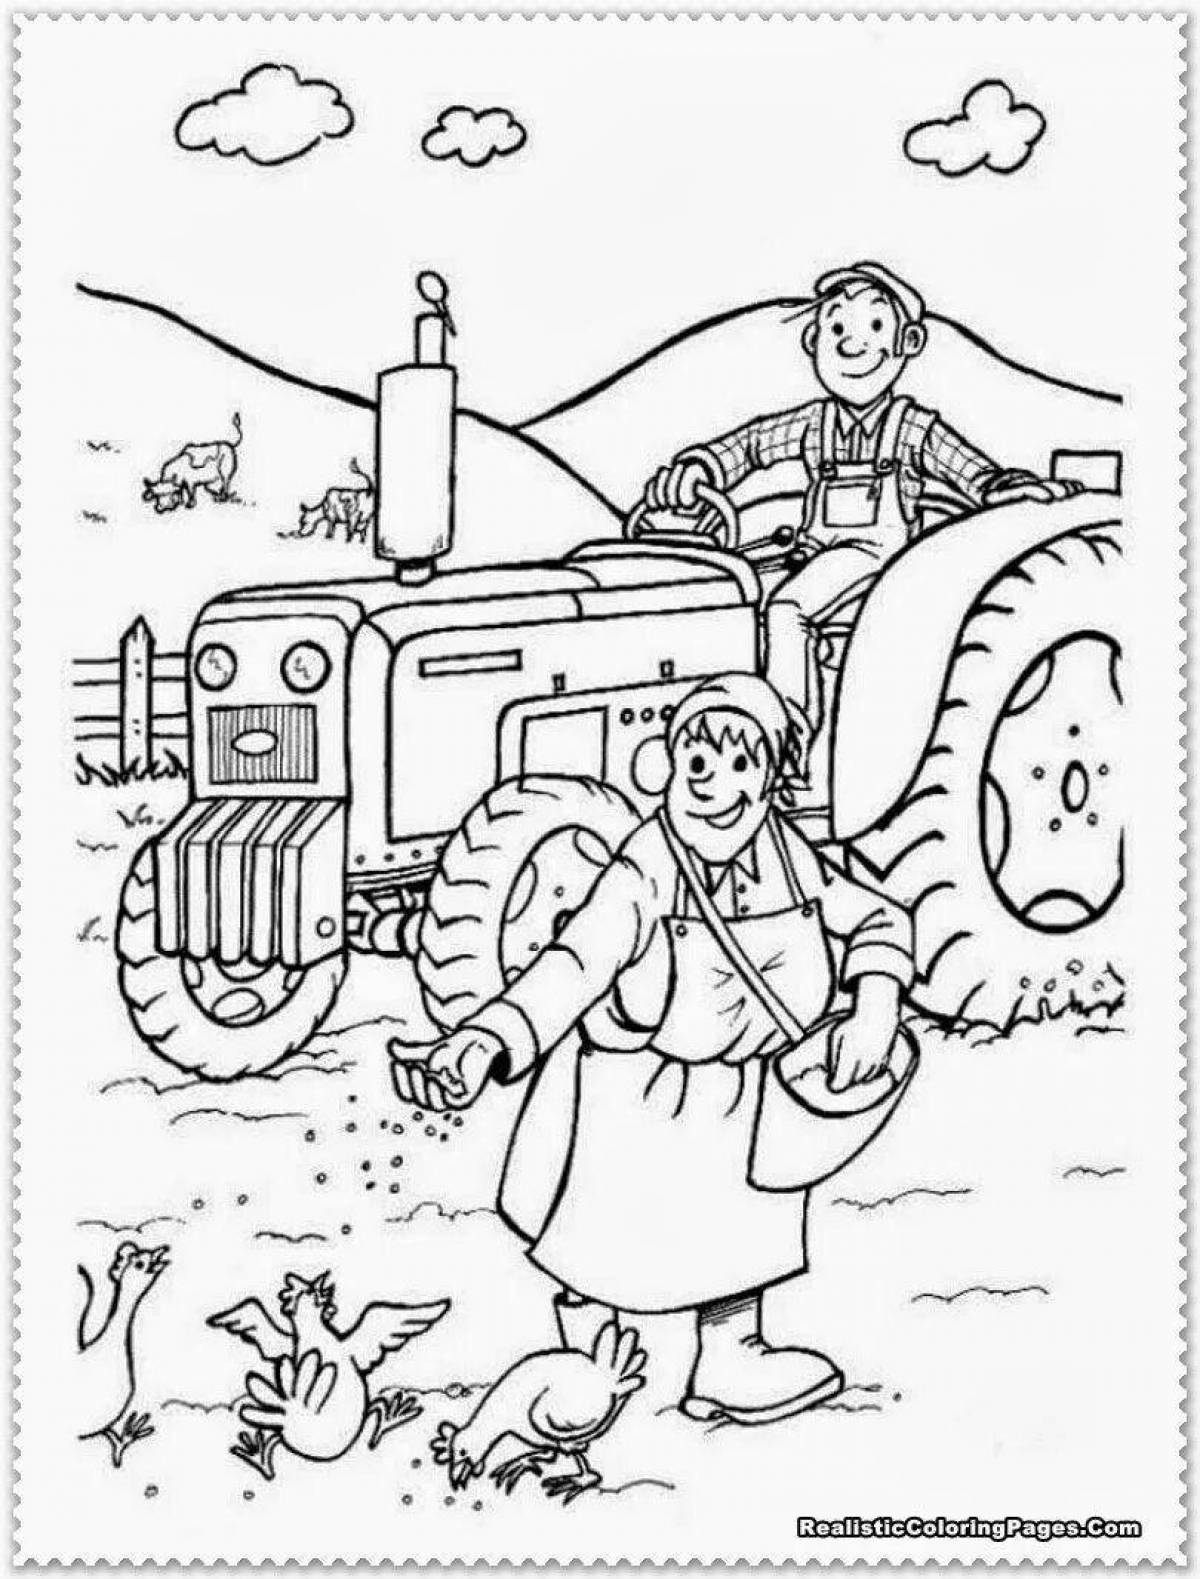 Colorful farmer coloring book for kids